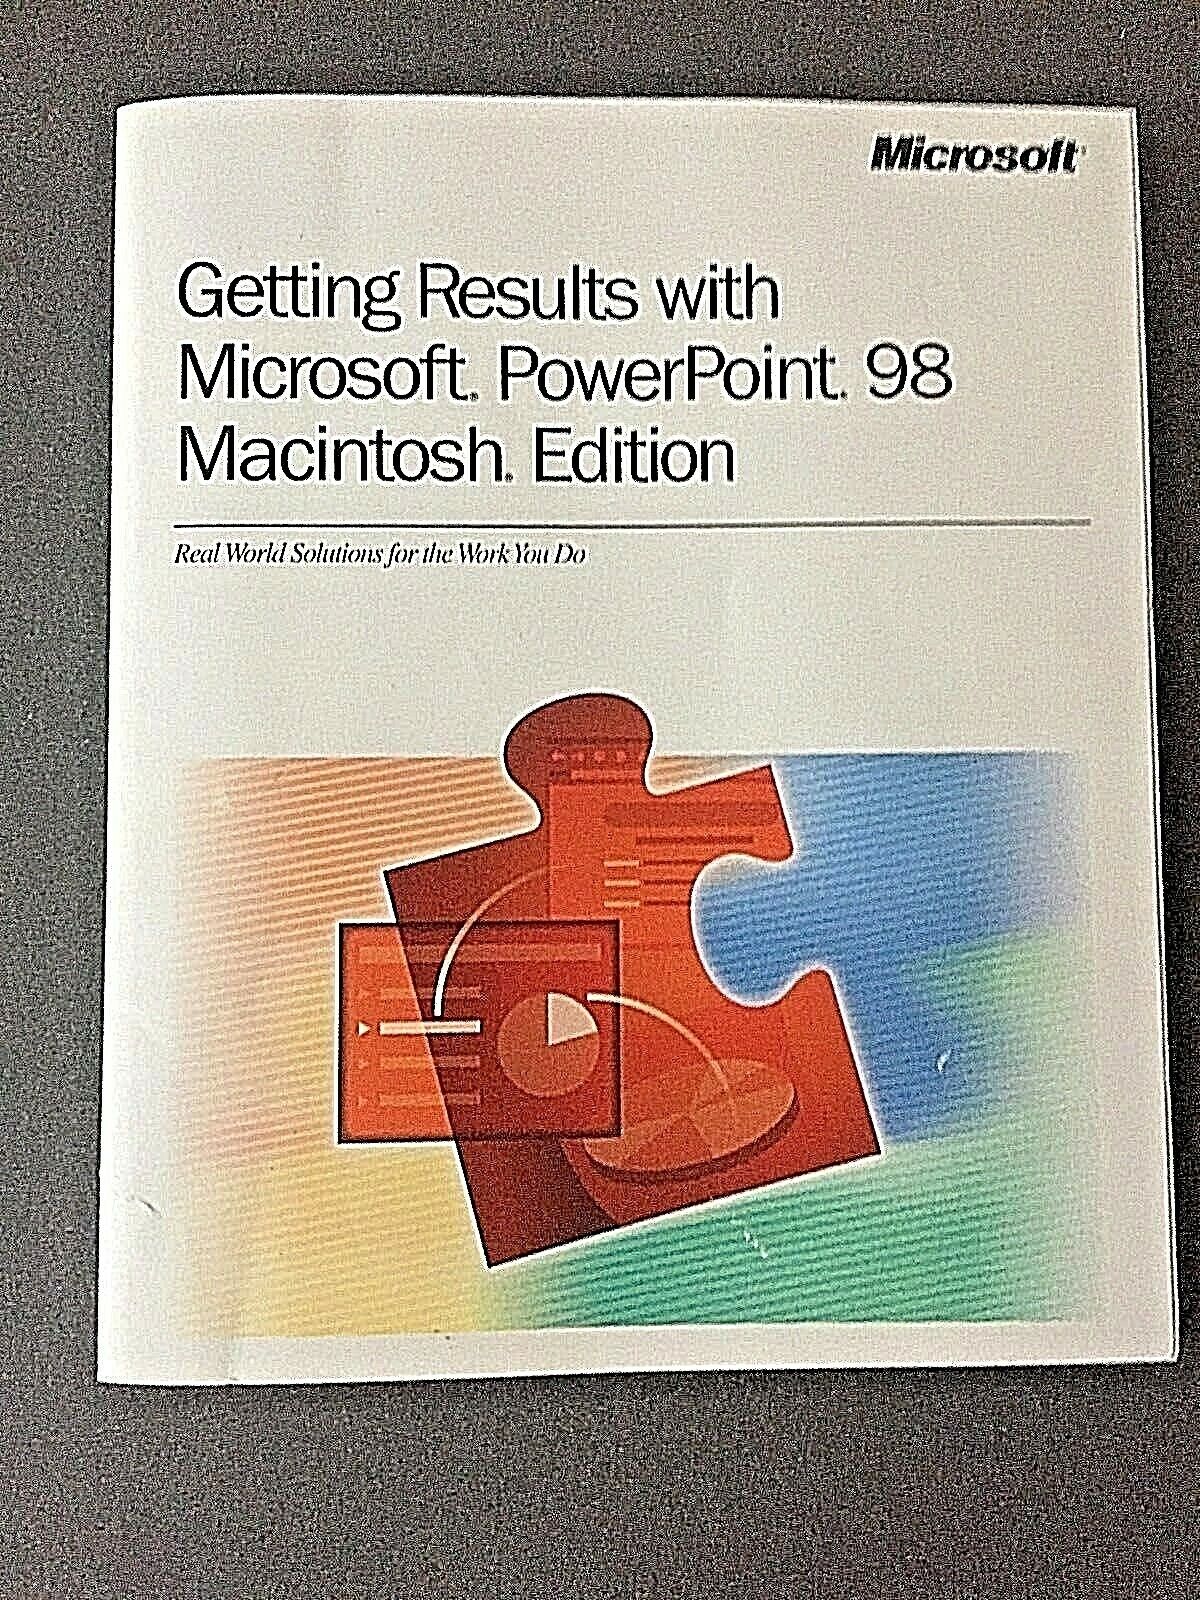 Vintage 1998 Macintosh Edition: Getting Results with Microsoft Powerpoint pbk